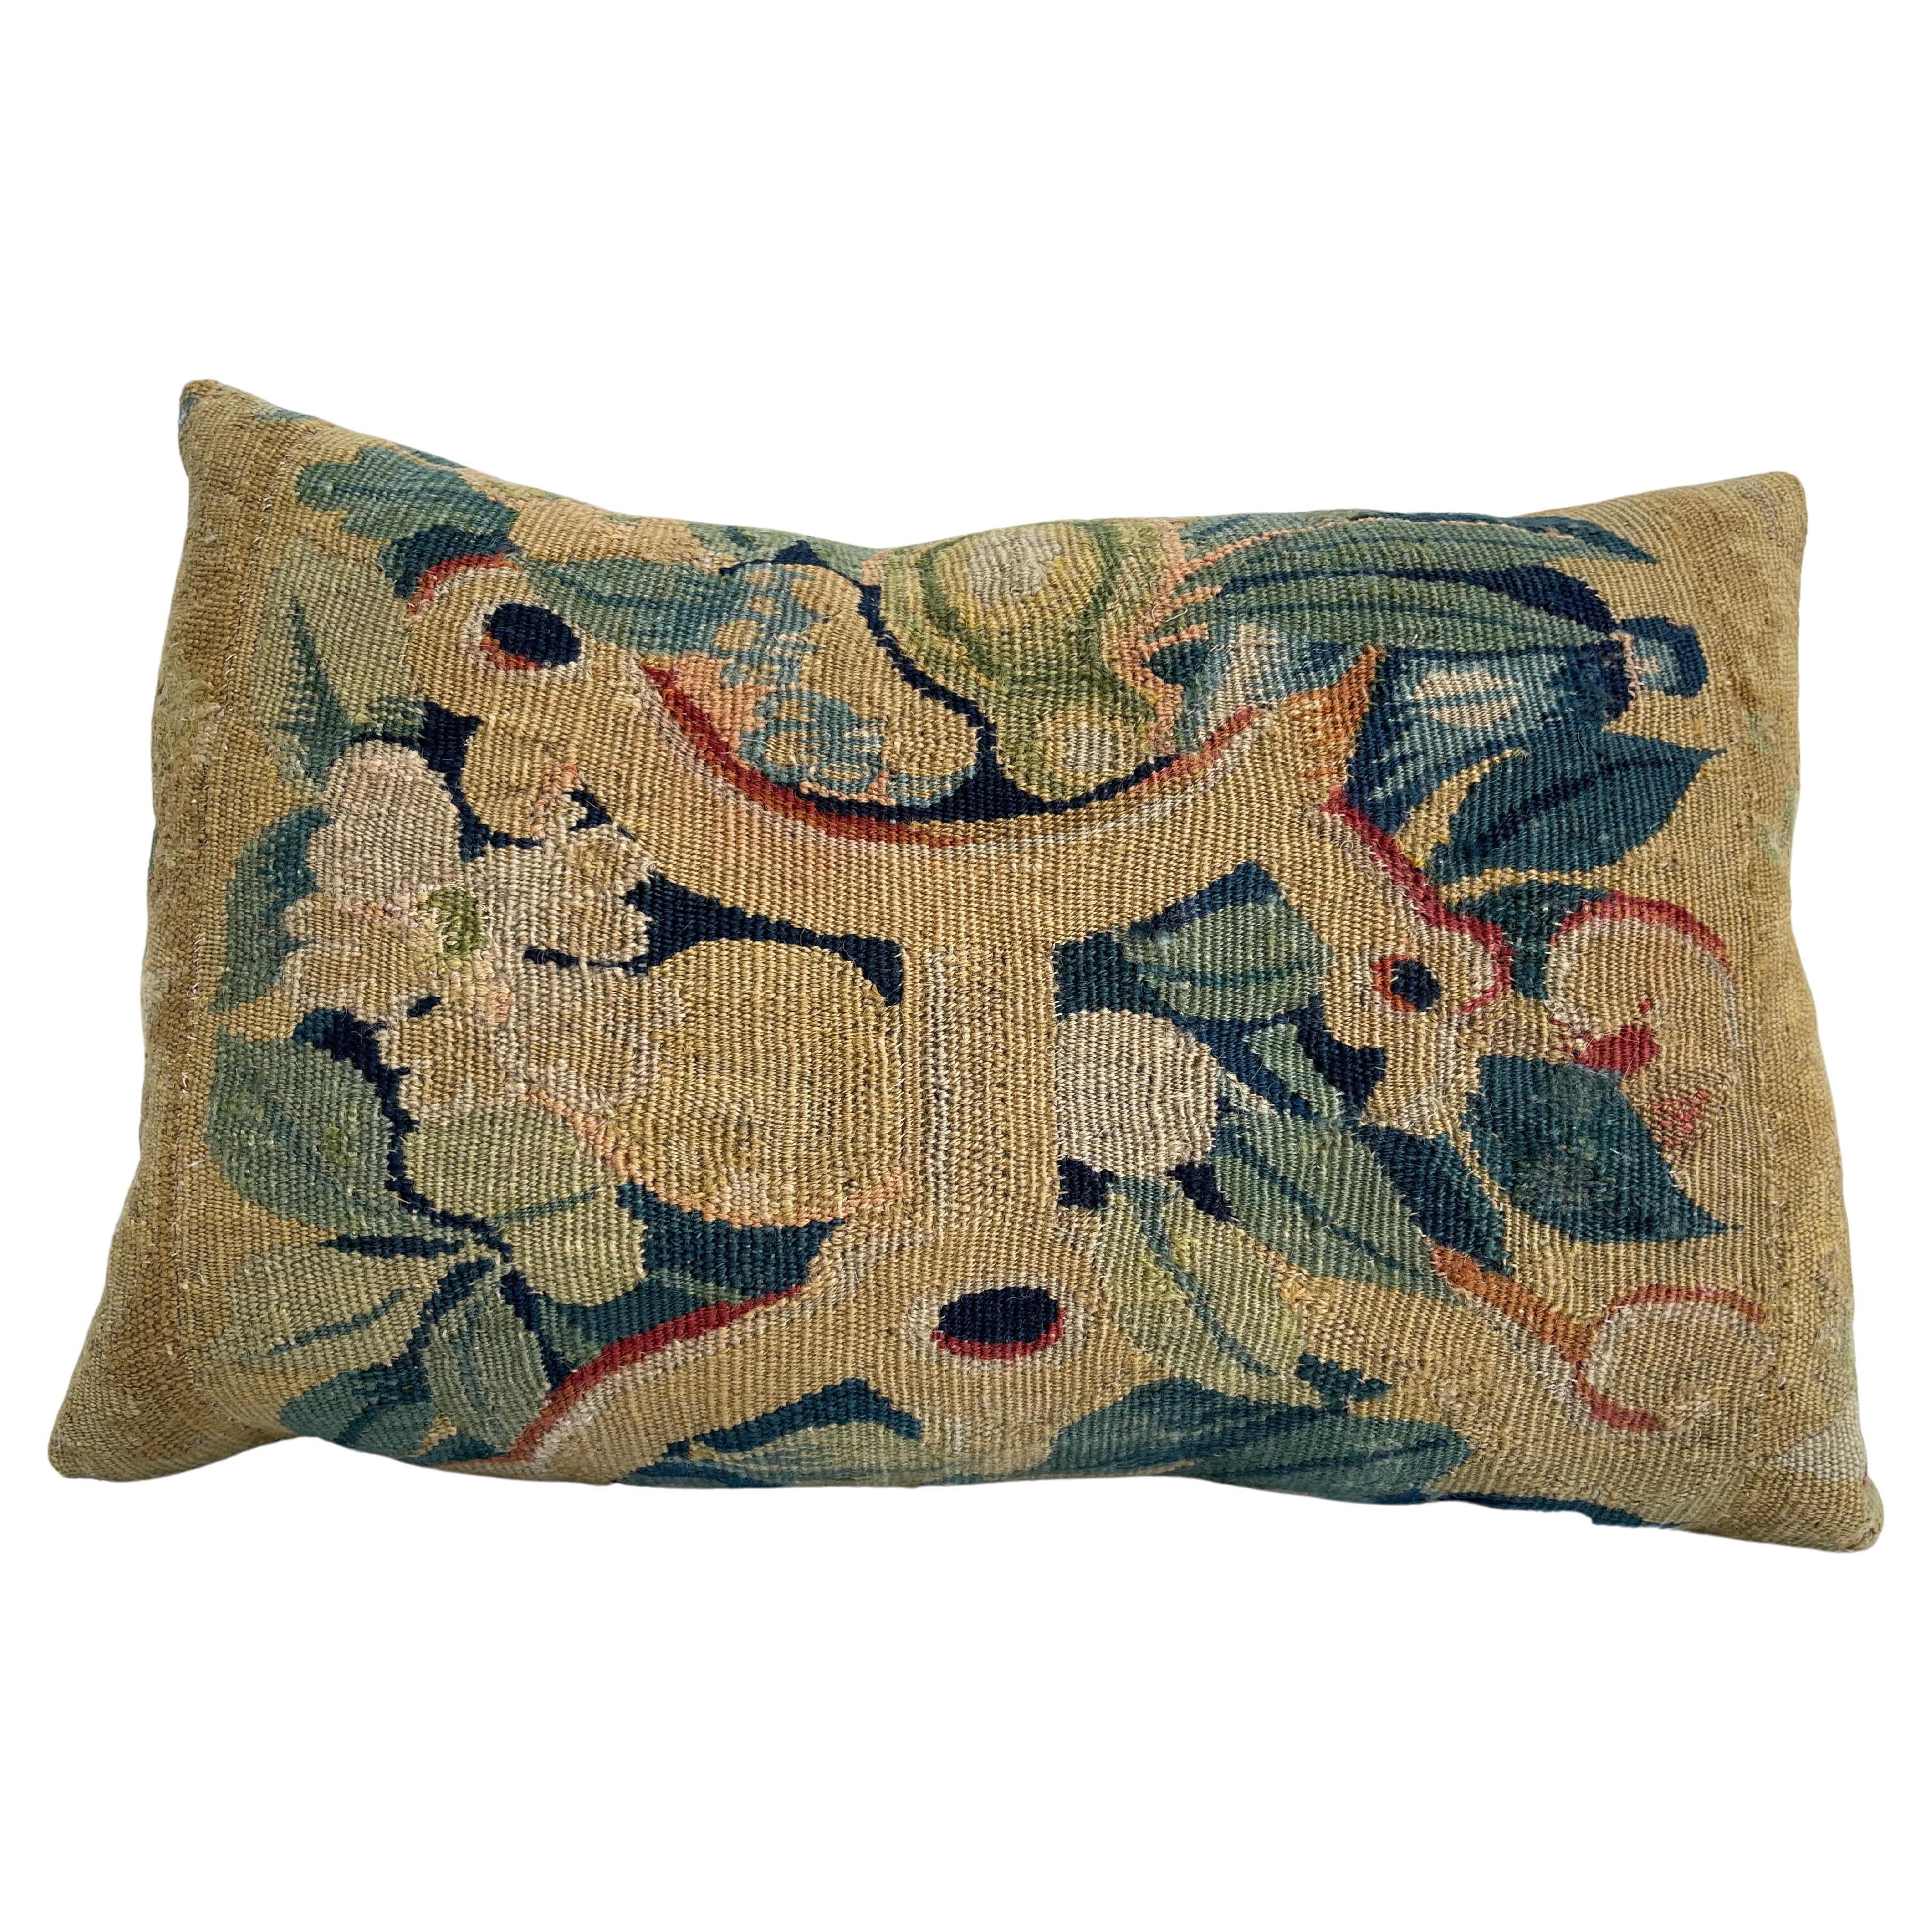 17th Century Flemish Tapestry Pillow 16" X 11" For Sale